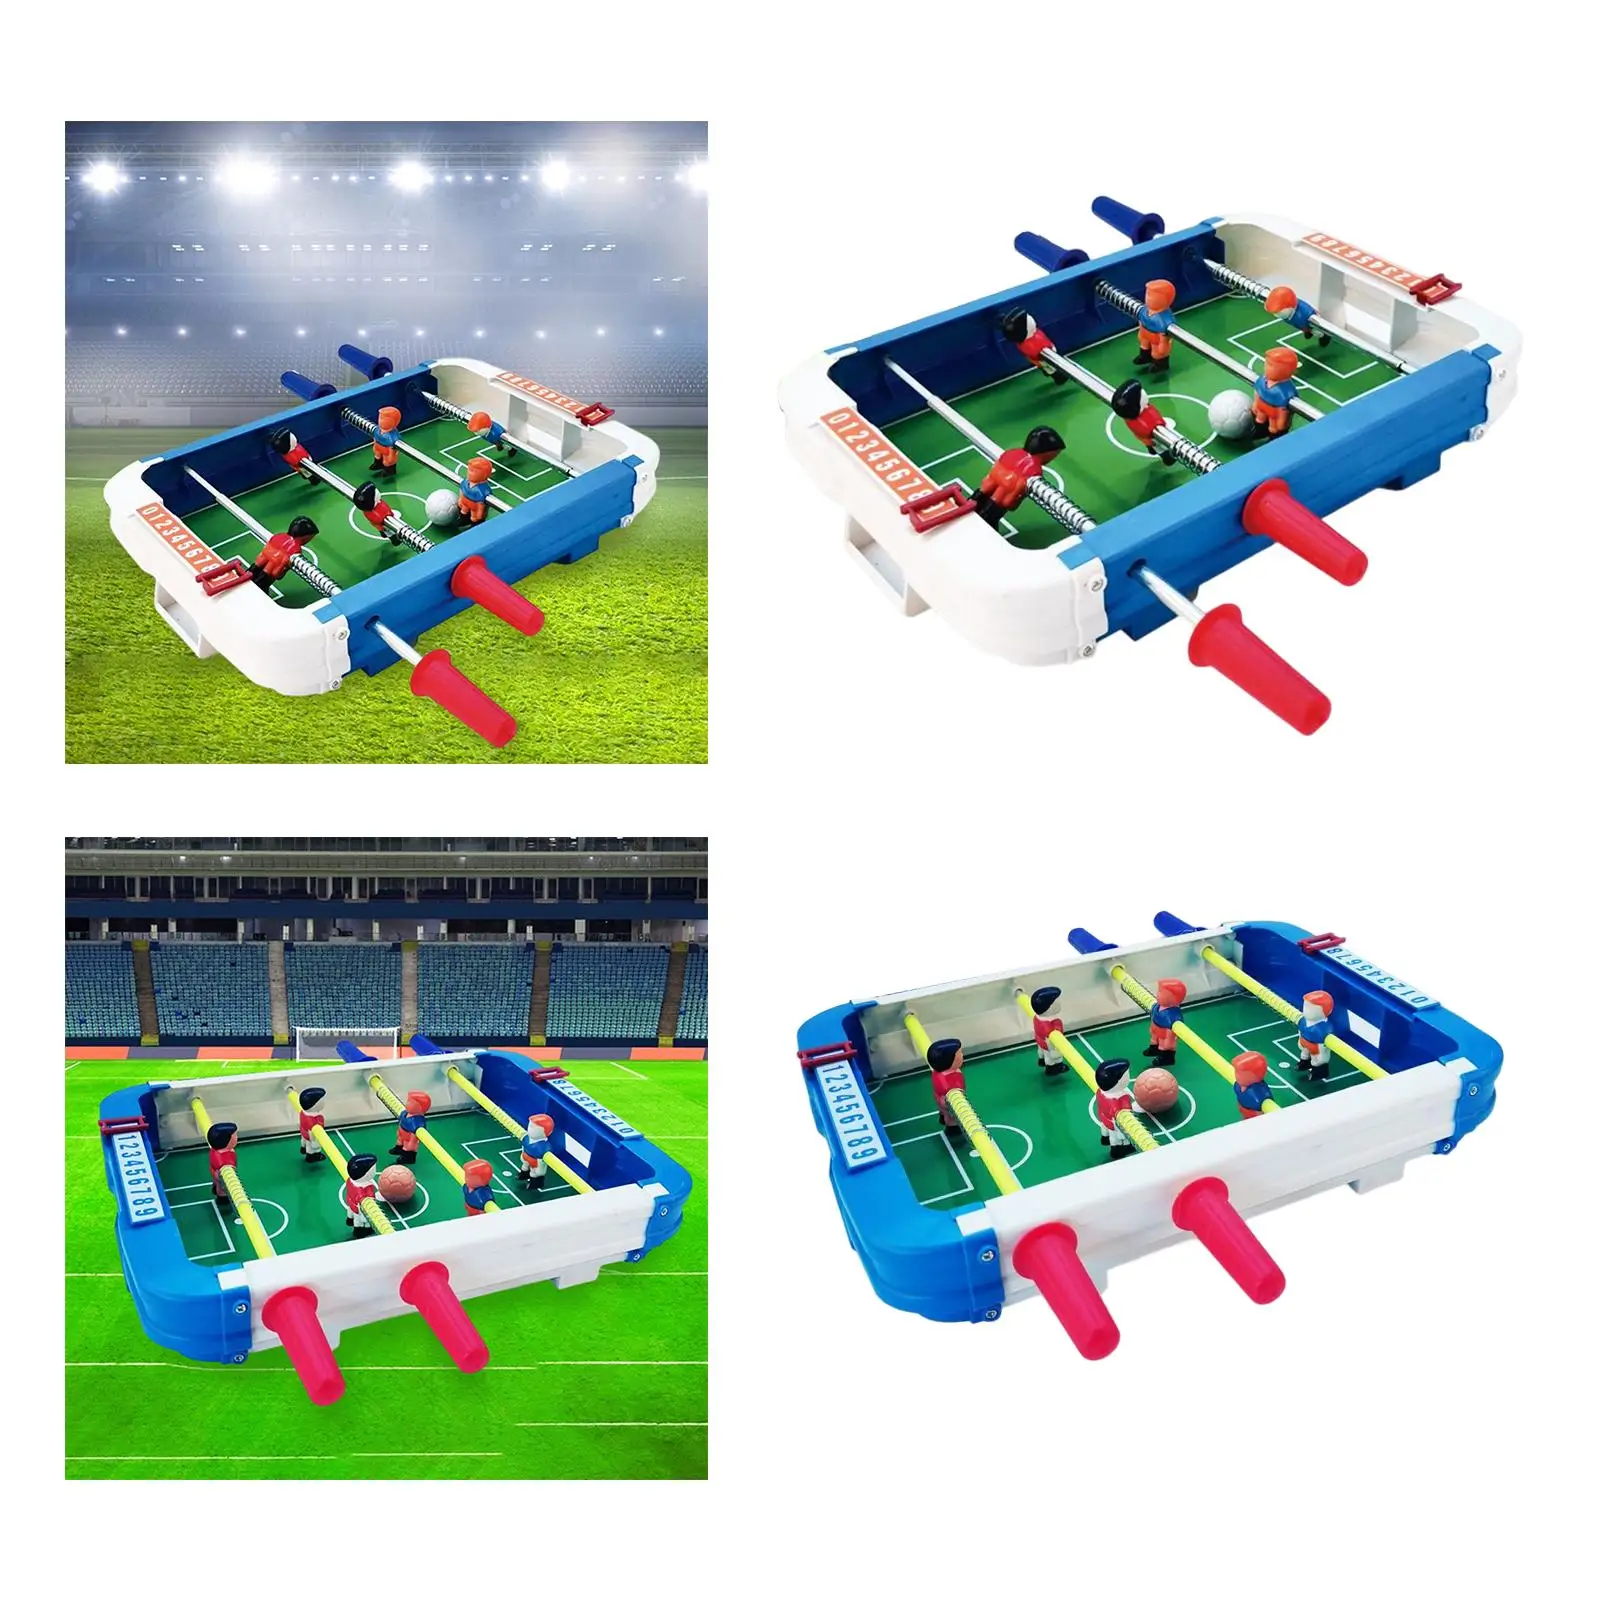 Compact Mini Foosball Table, Table Top Football Game Early Educational Toy Tabletop Soccer Game for Game Rooms Adults Kids